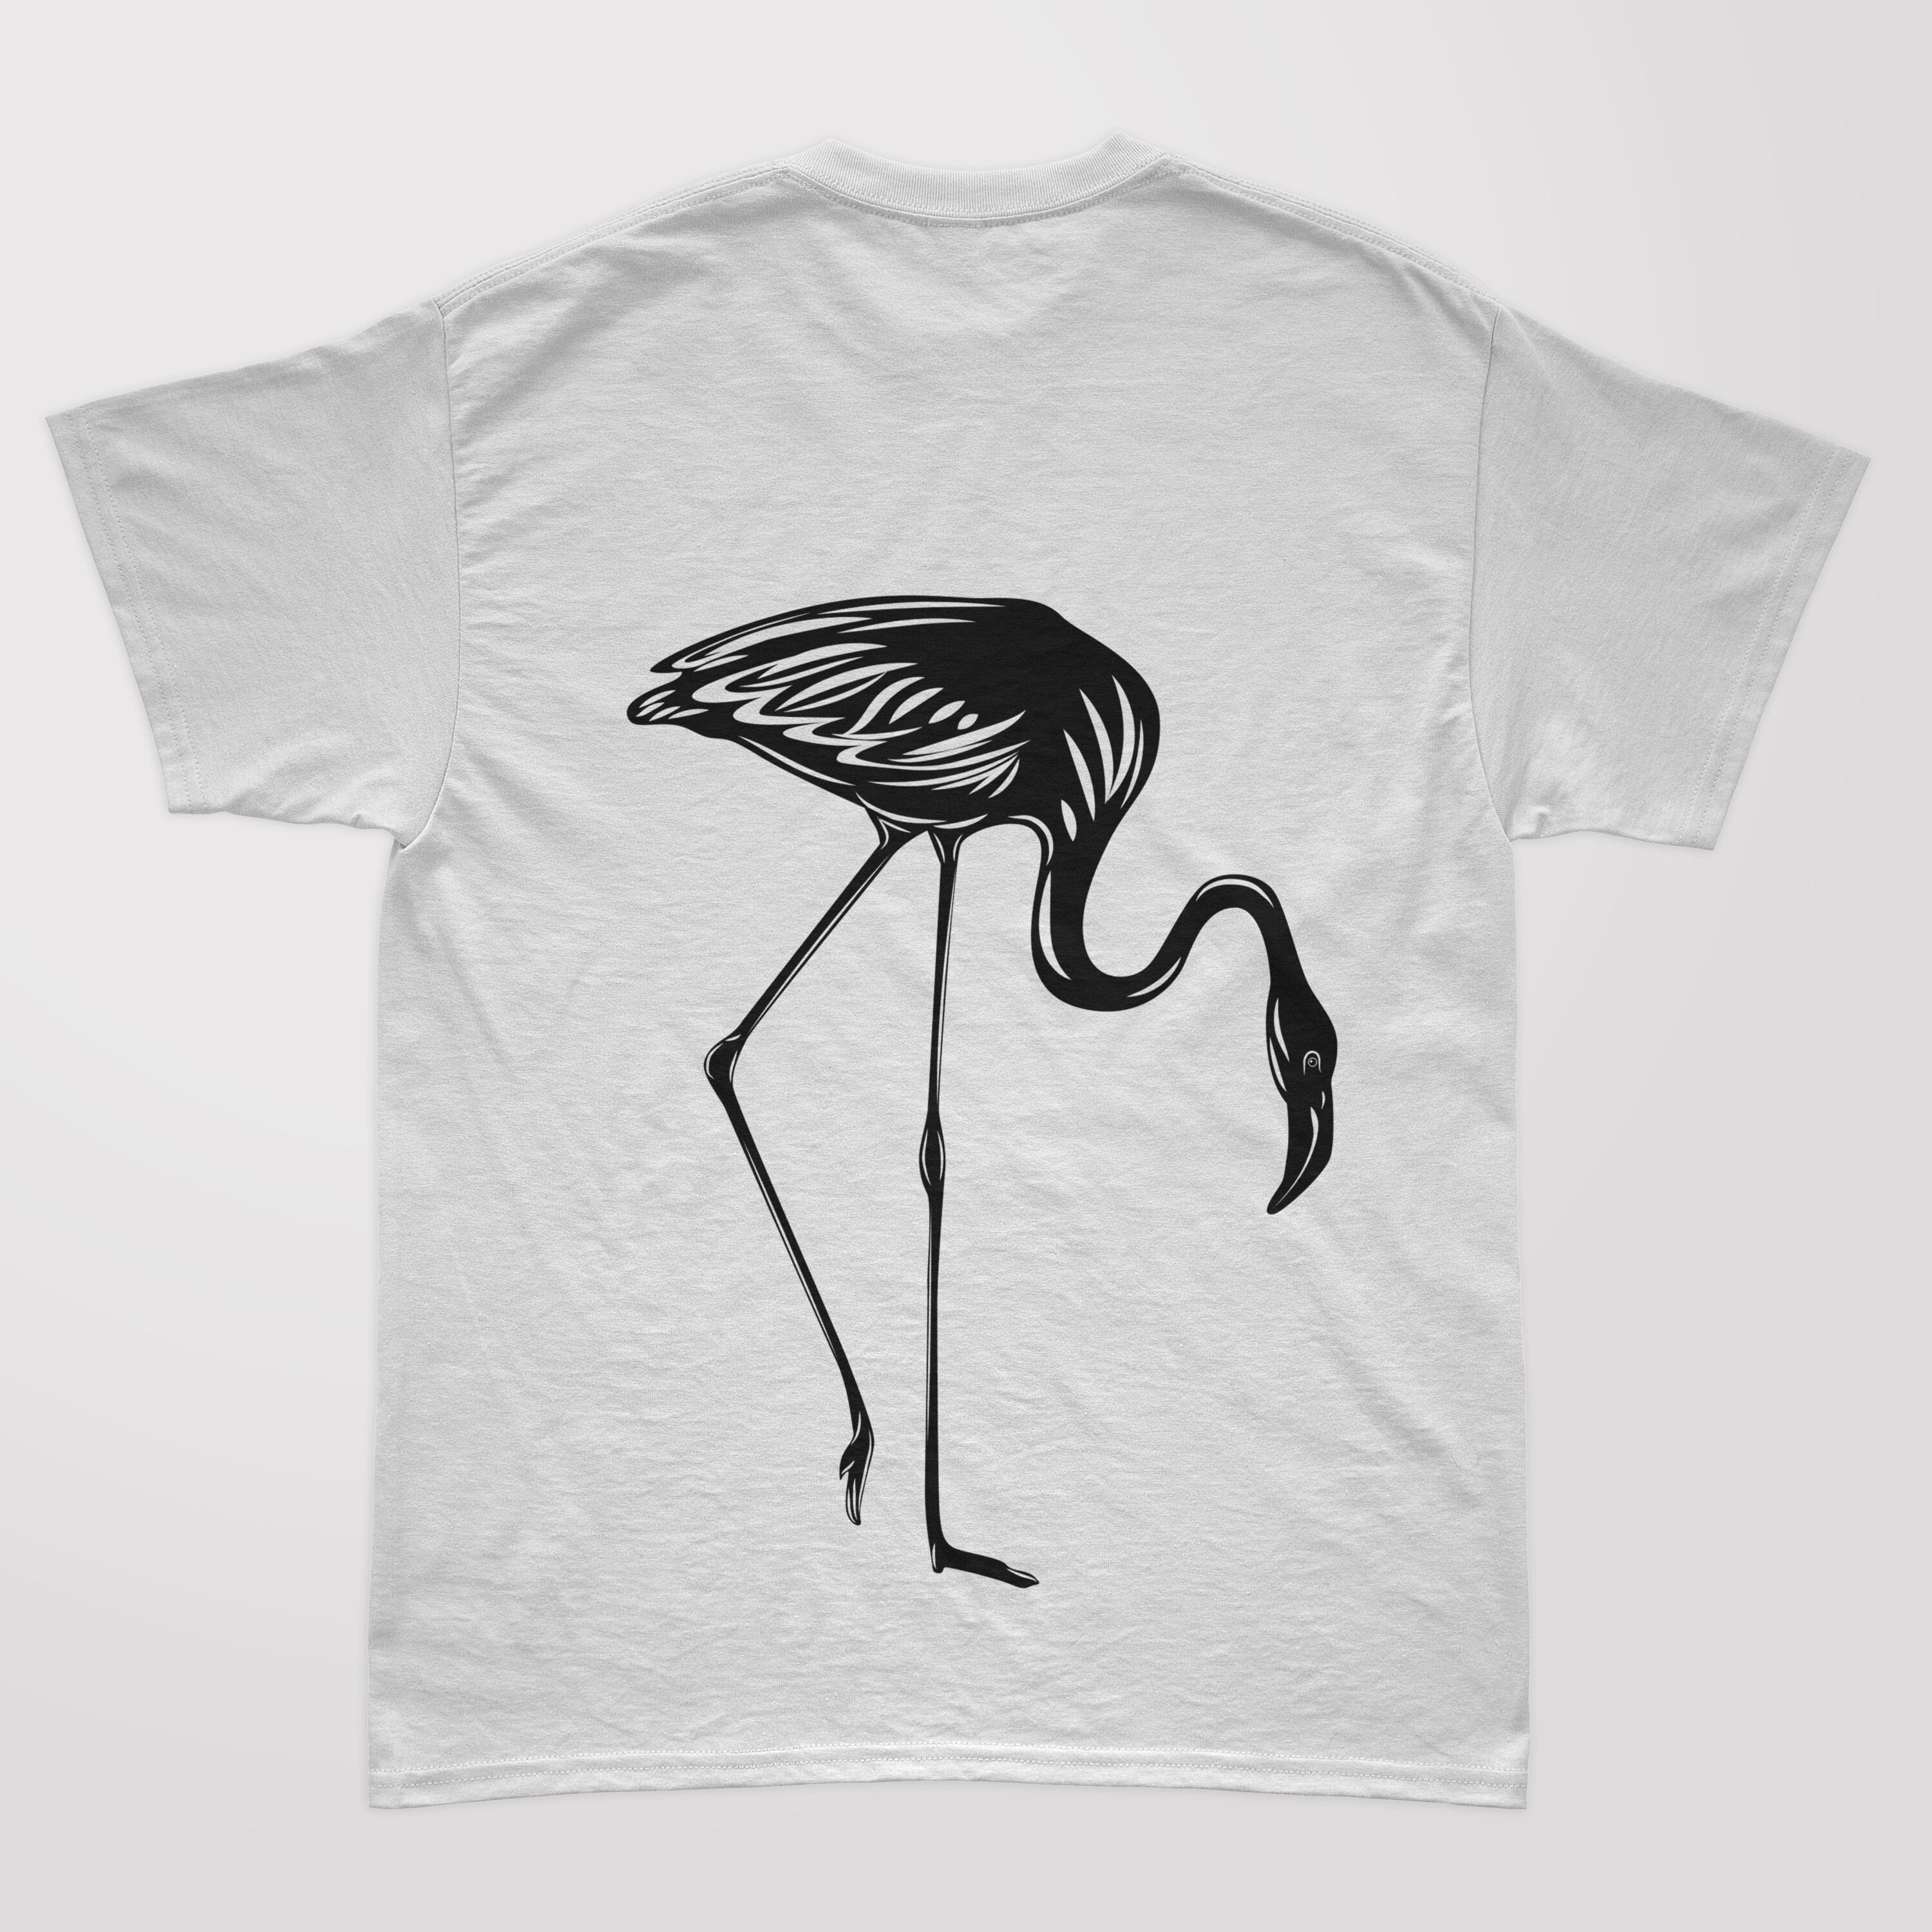 Cool black flamingo for the different fabrics.